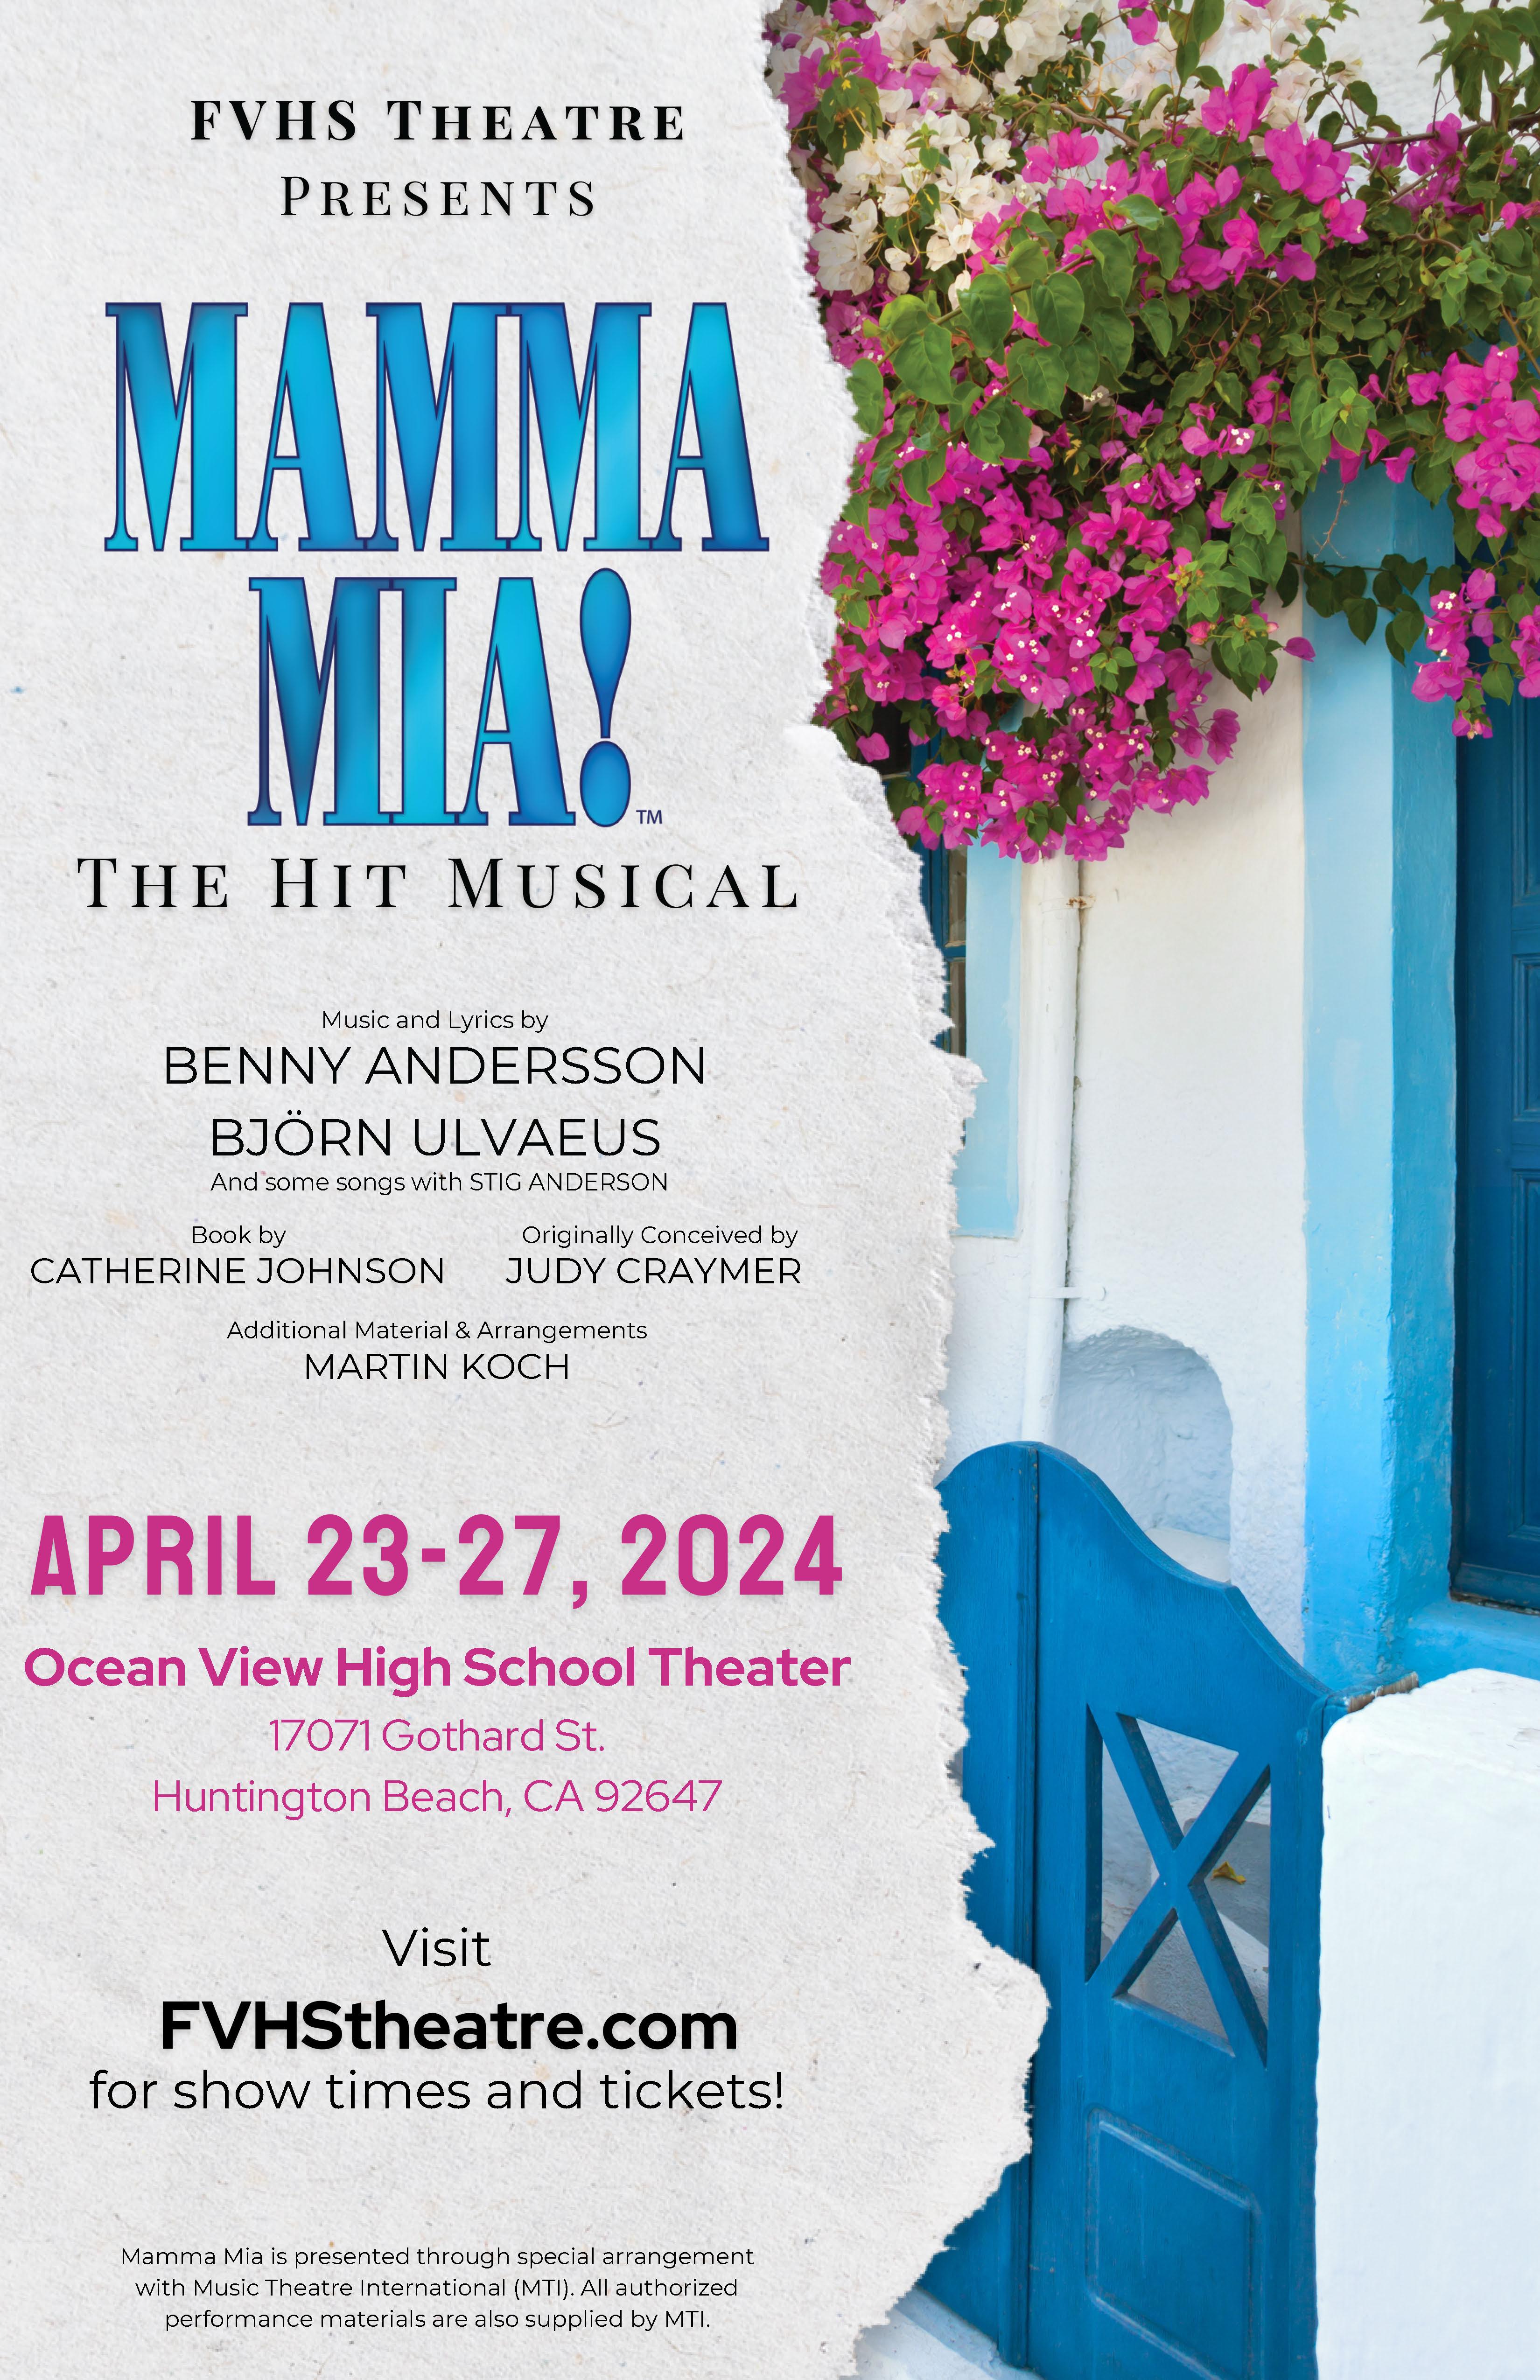 Tickets for Mamma Mia are available at fvhstheatre.com